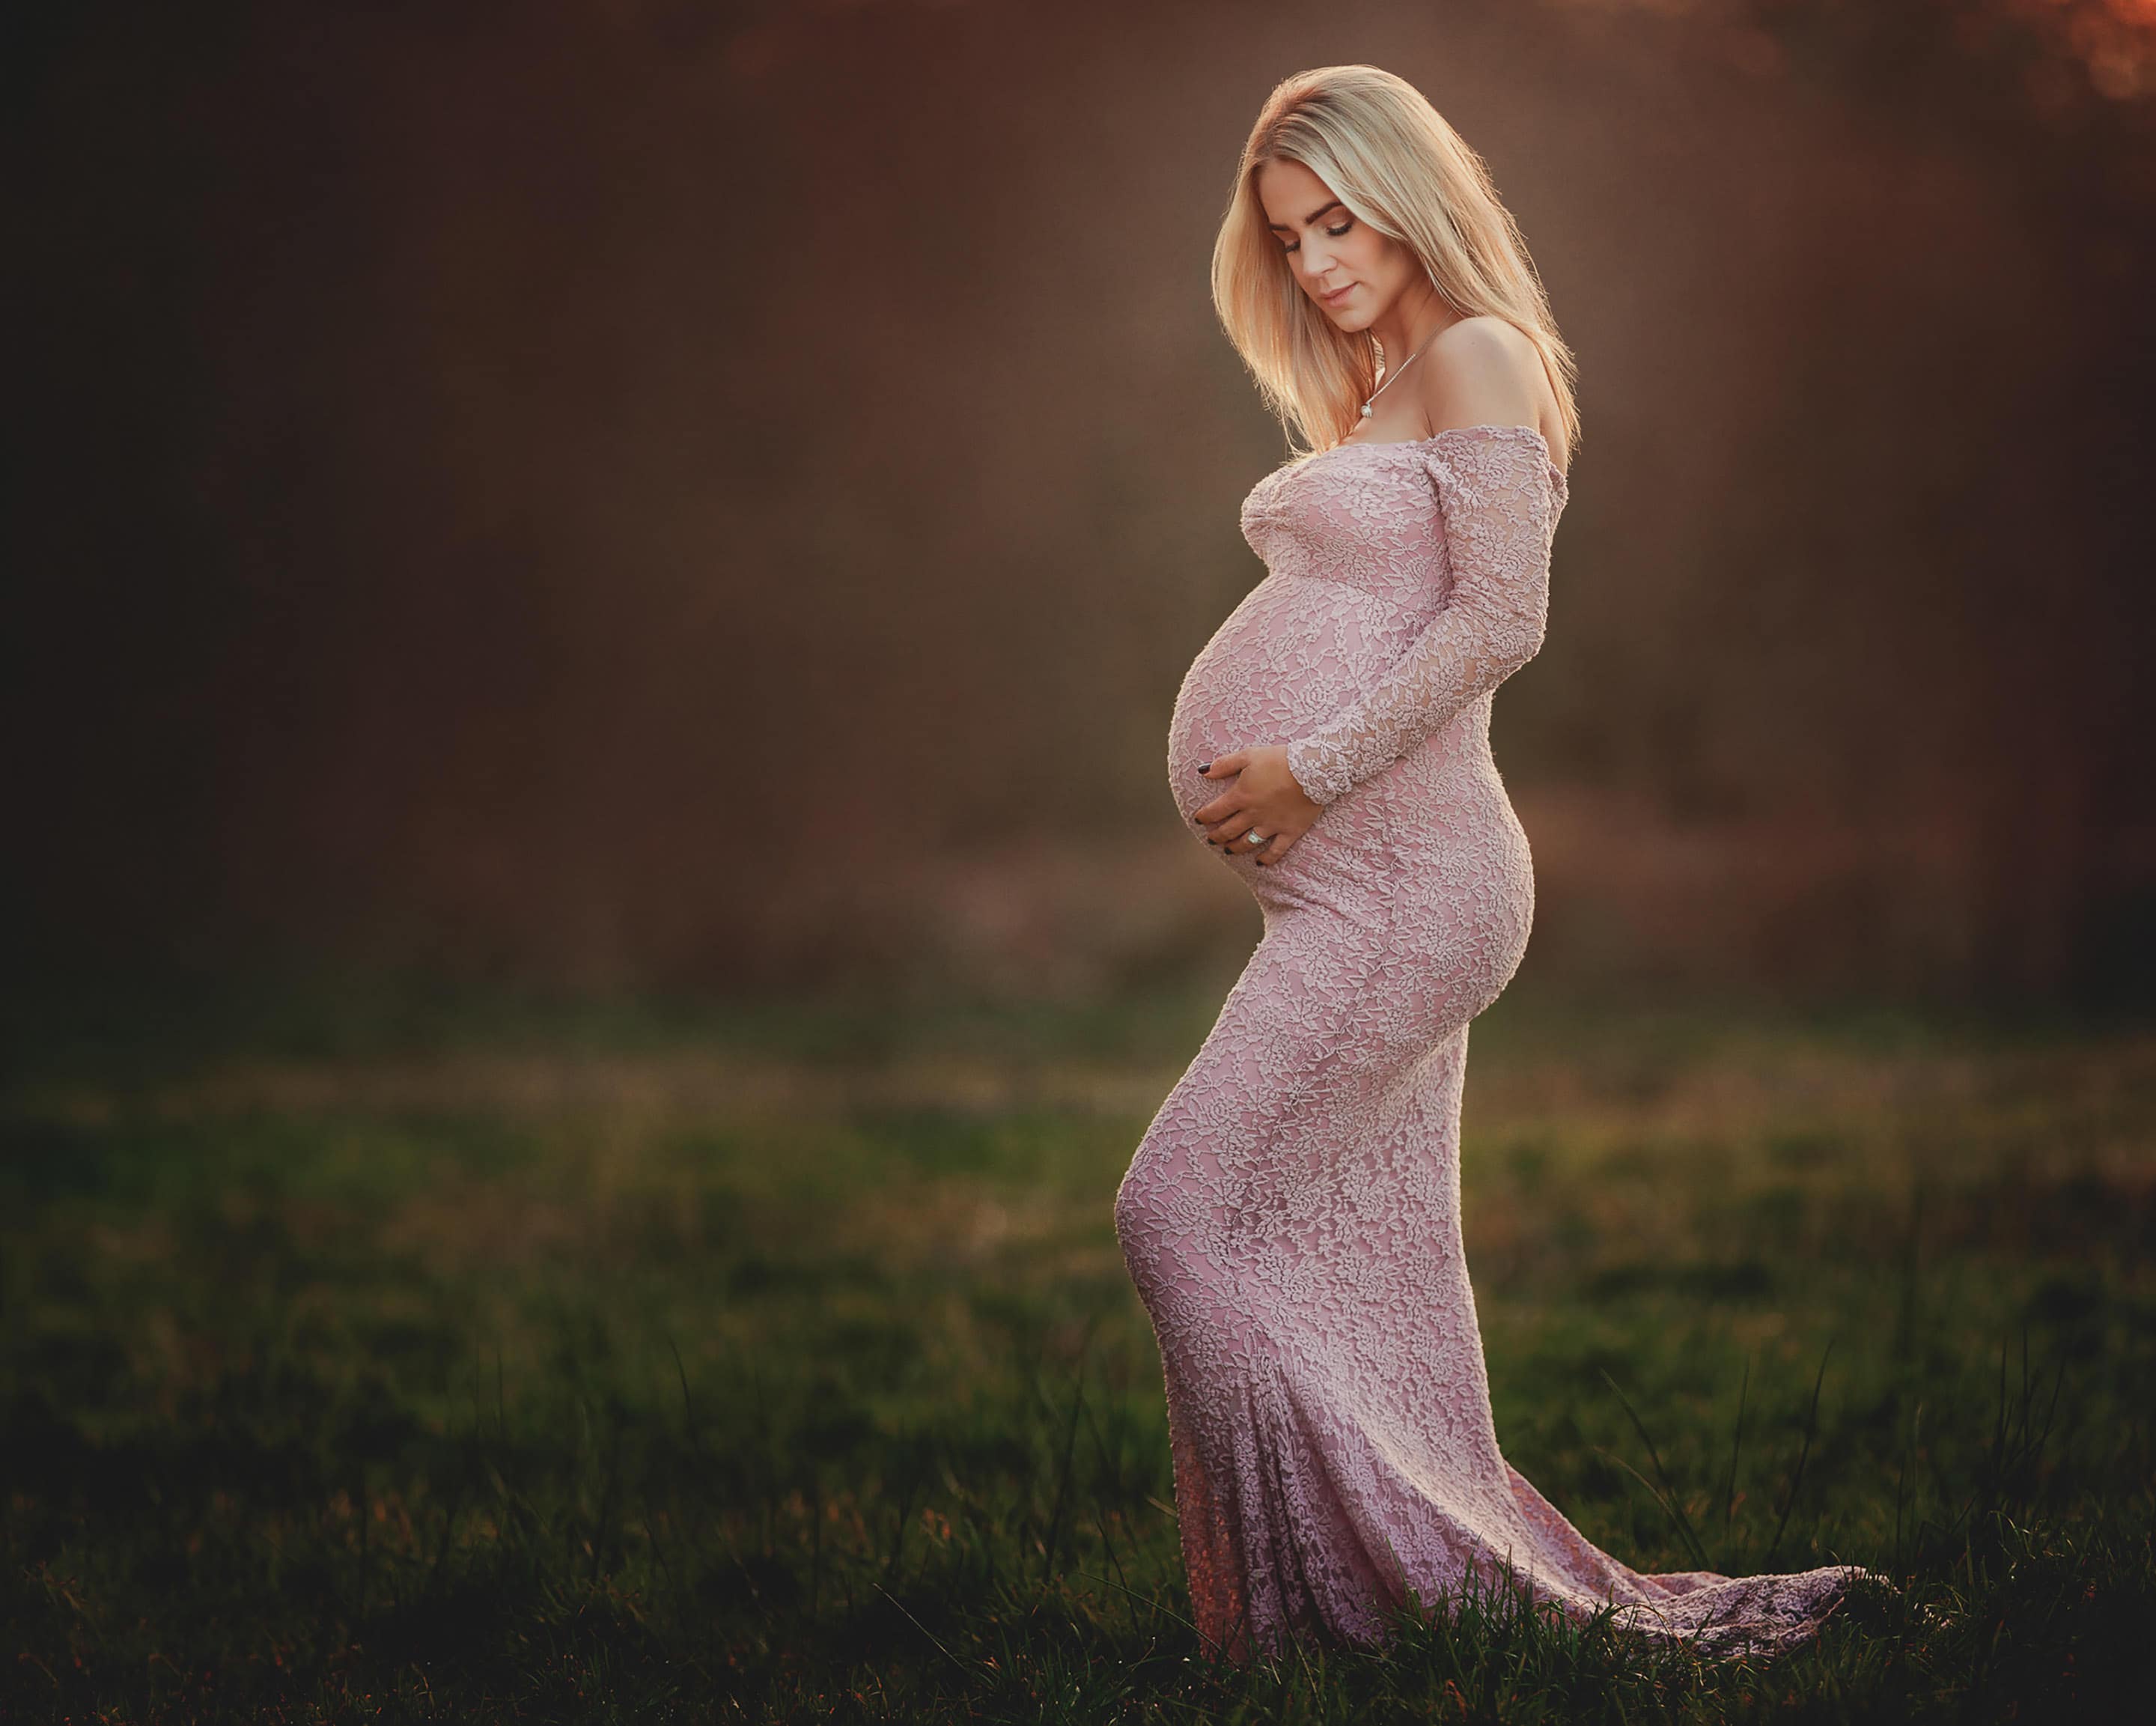 pregnant woman in pink dress holding her bump